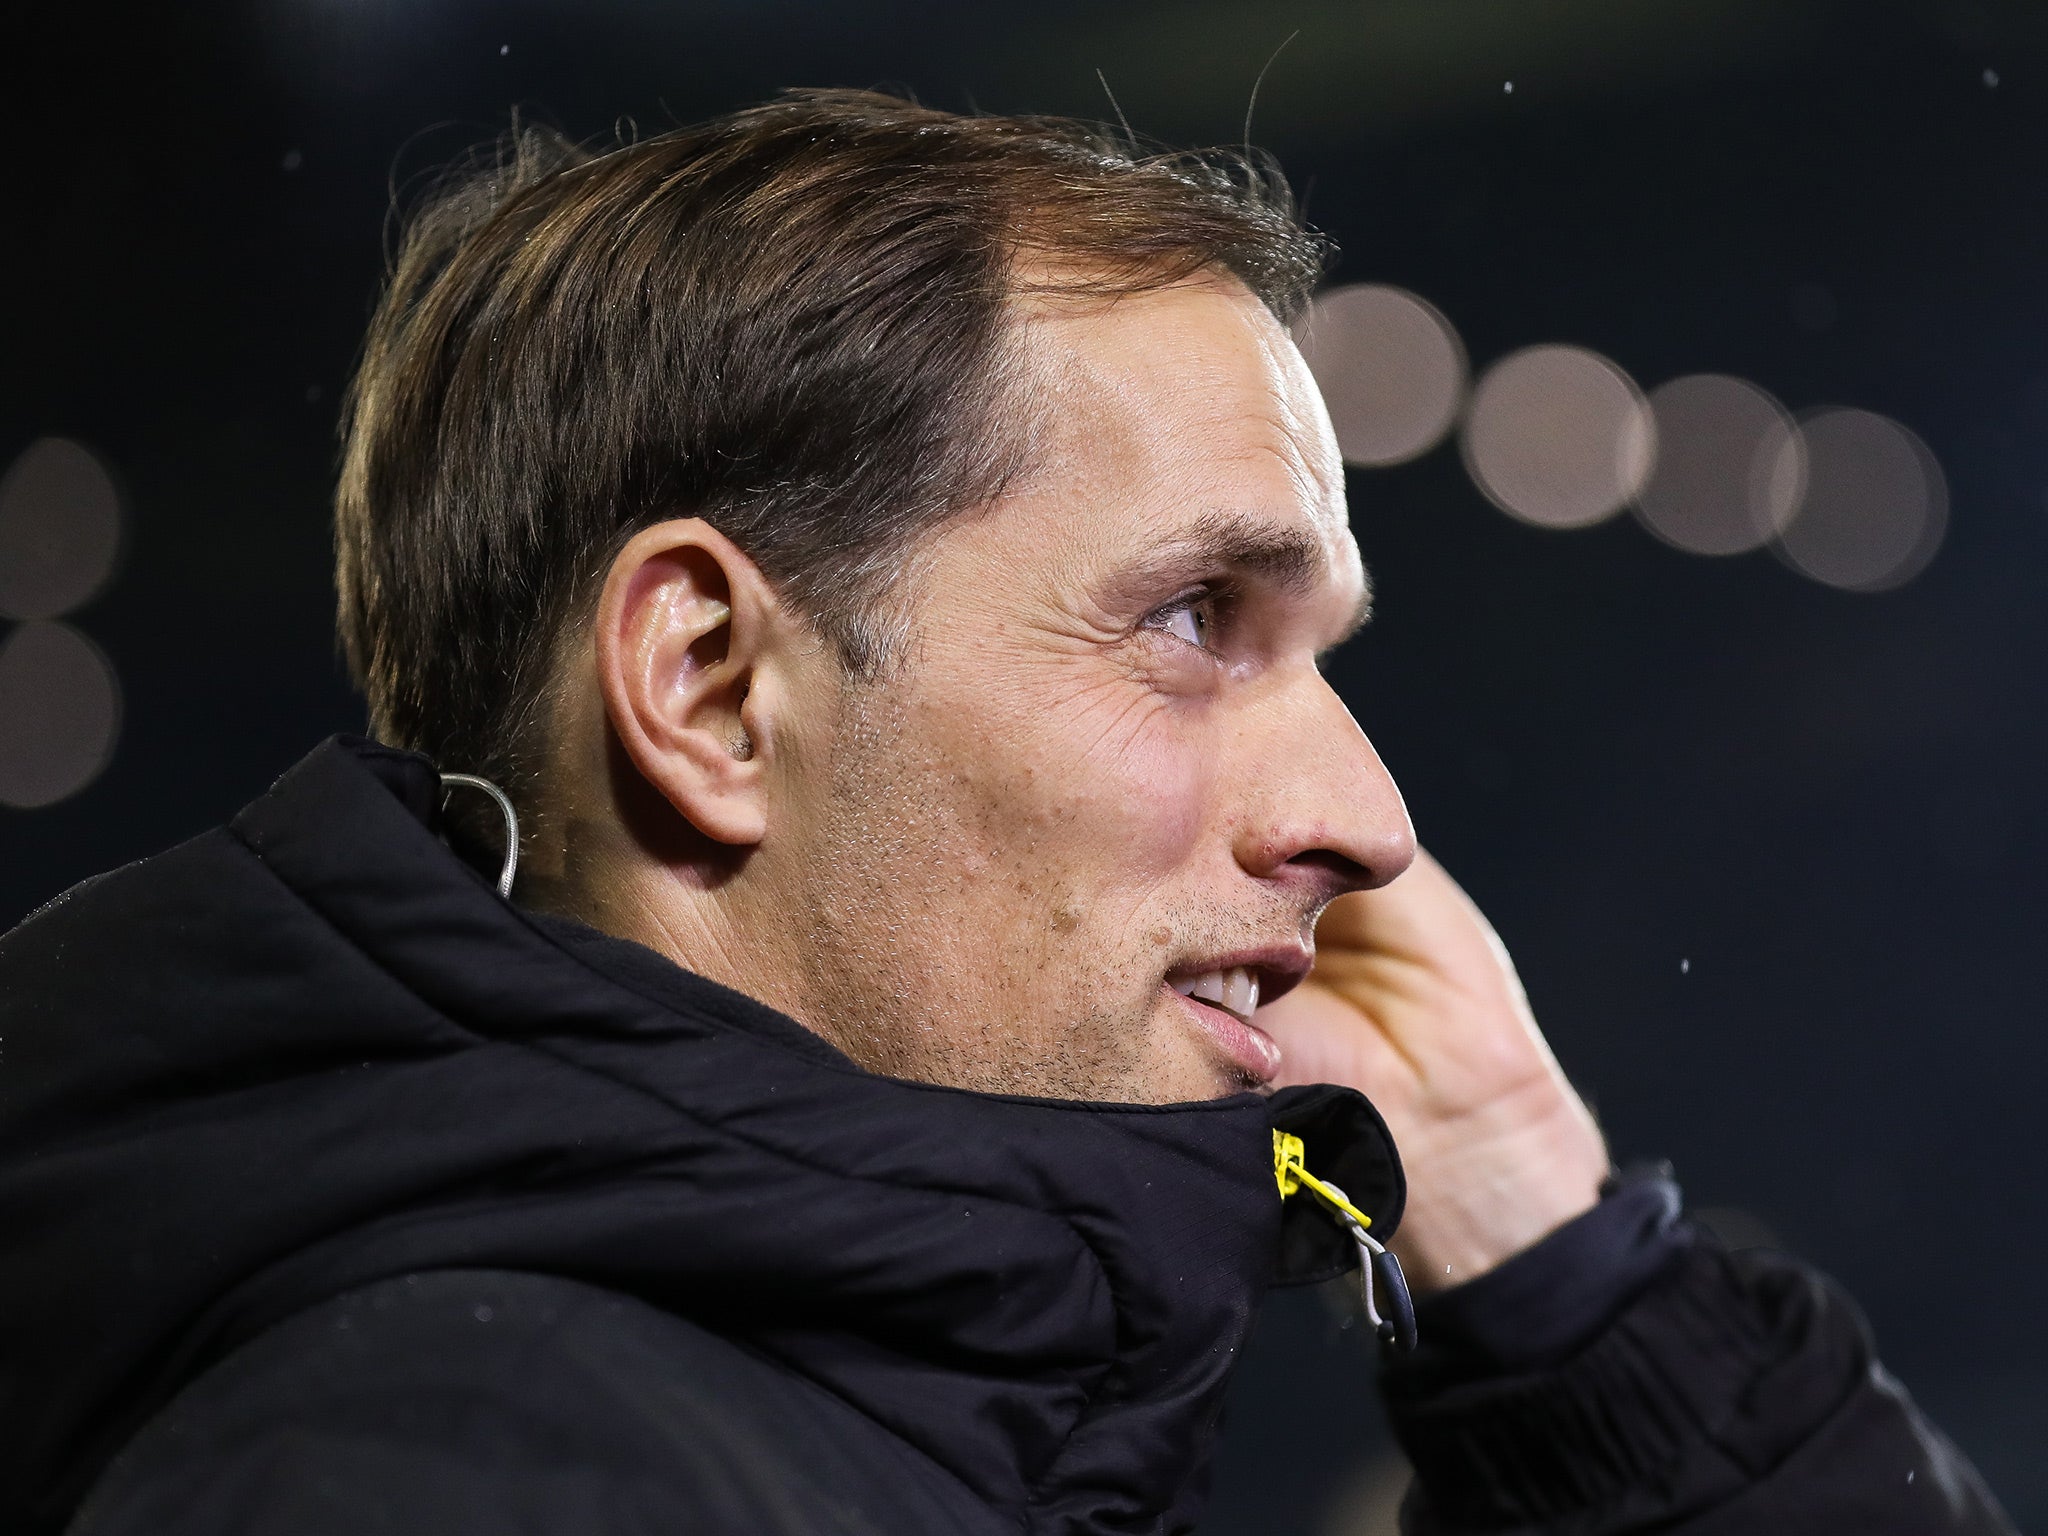 Thomas Tuchel was appointed as head coach at Dortmund in 2015